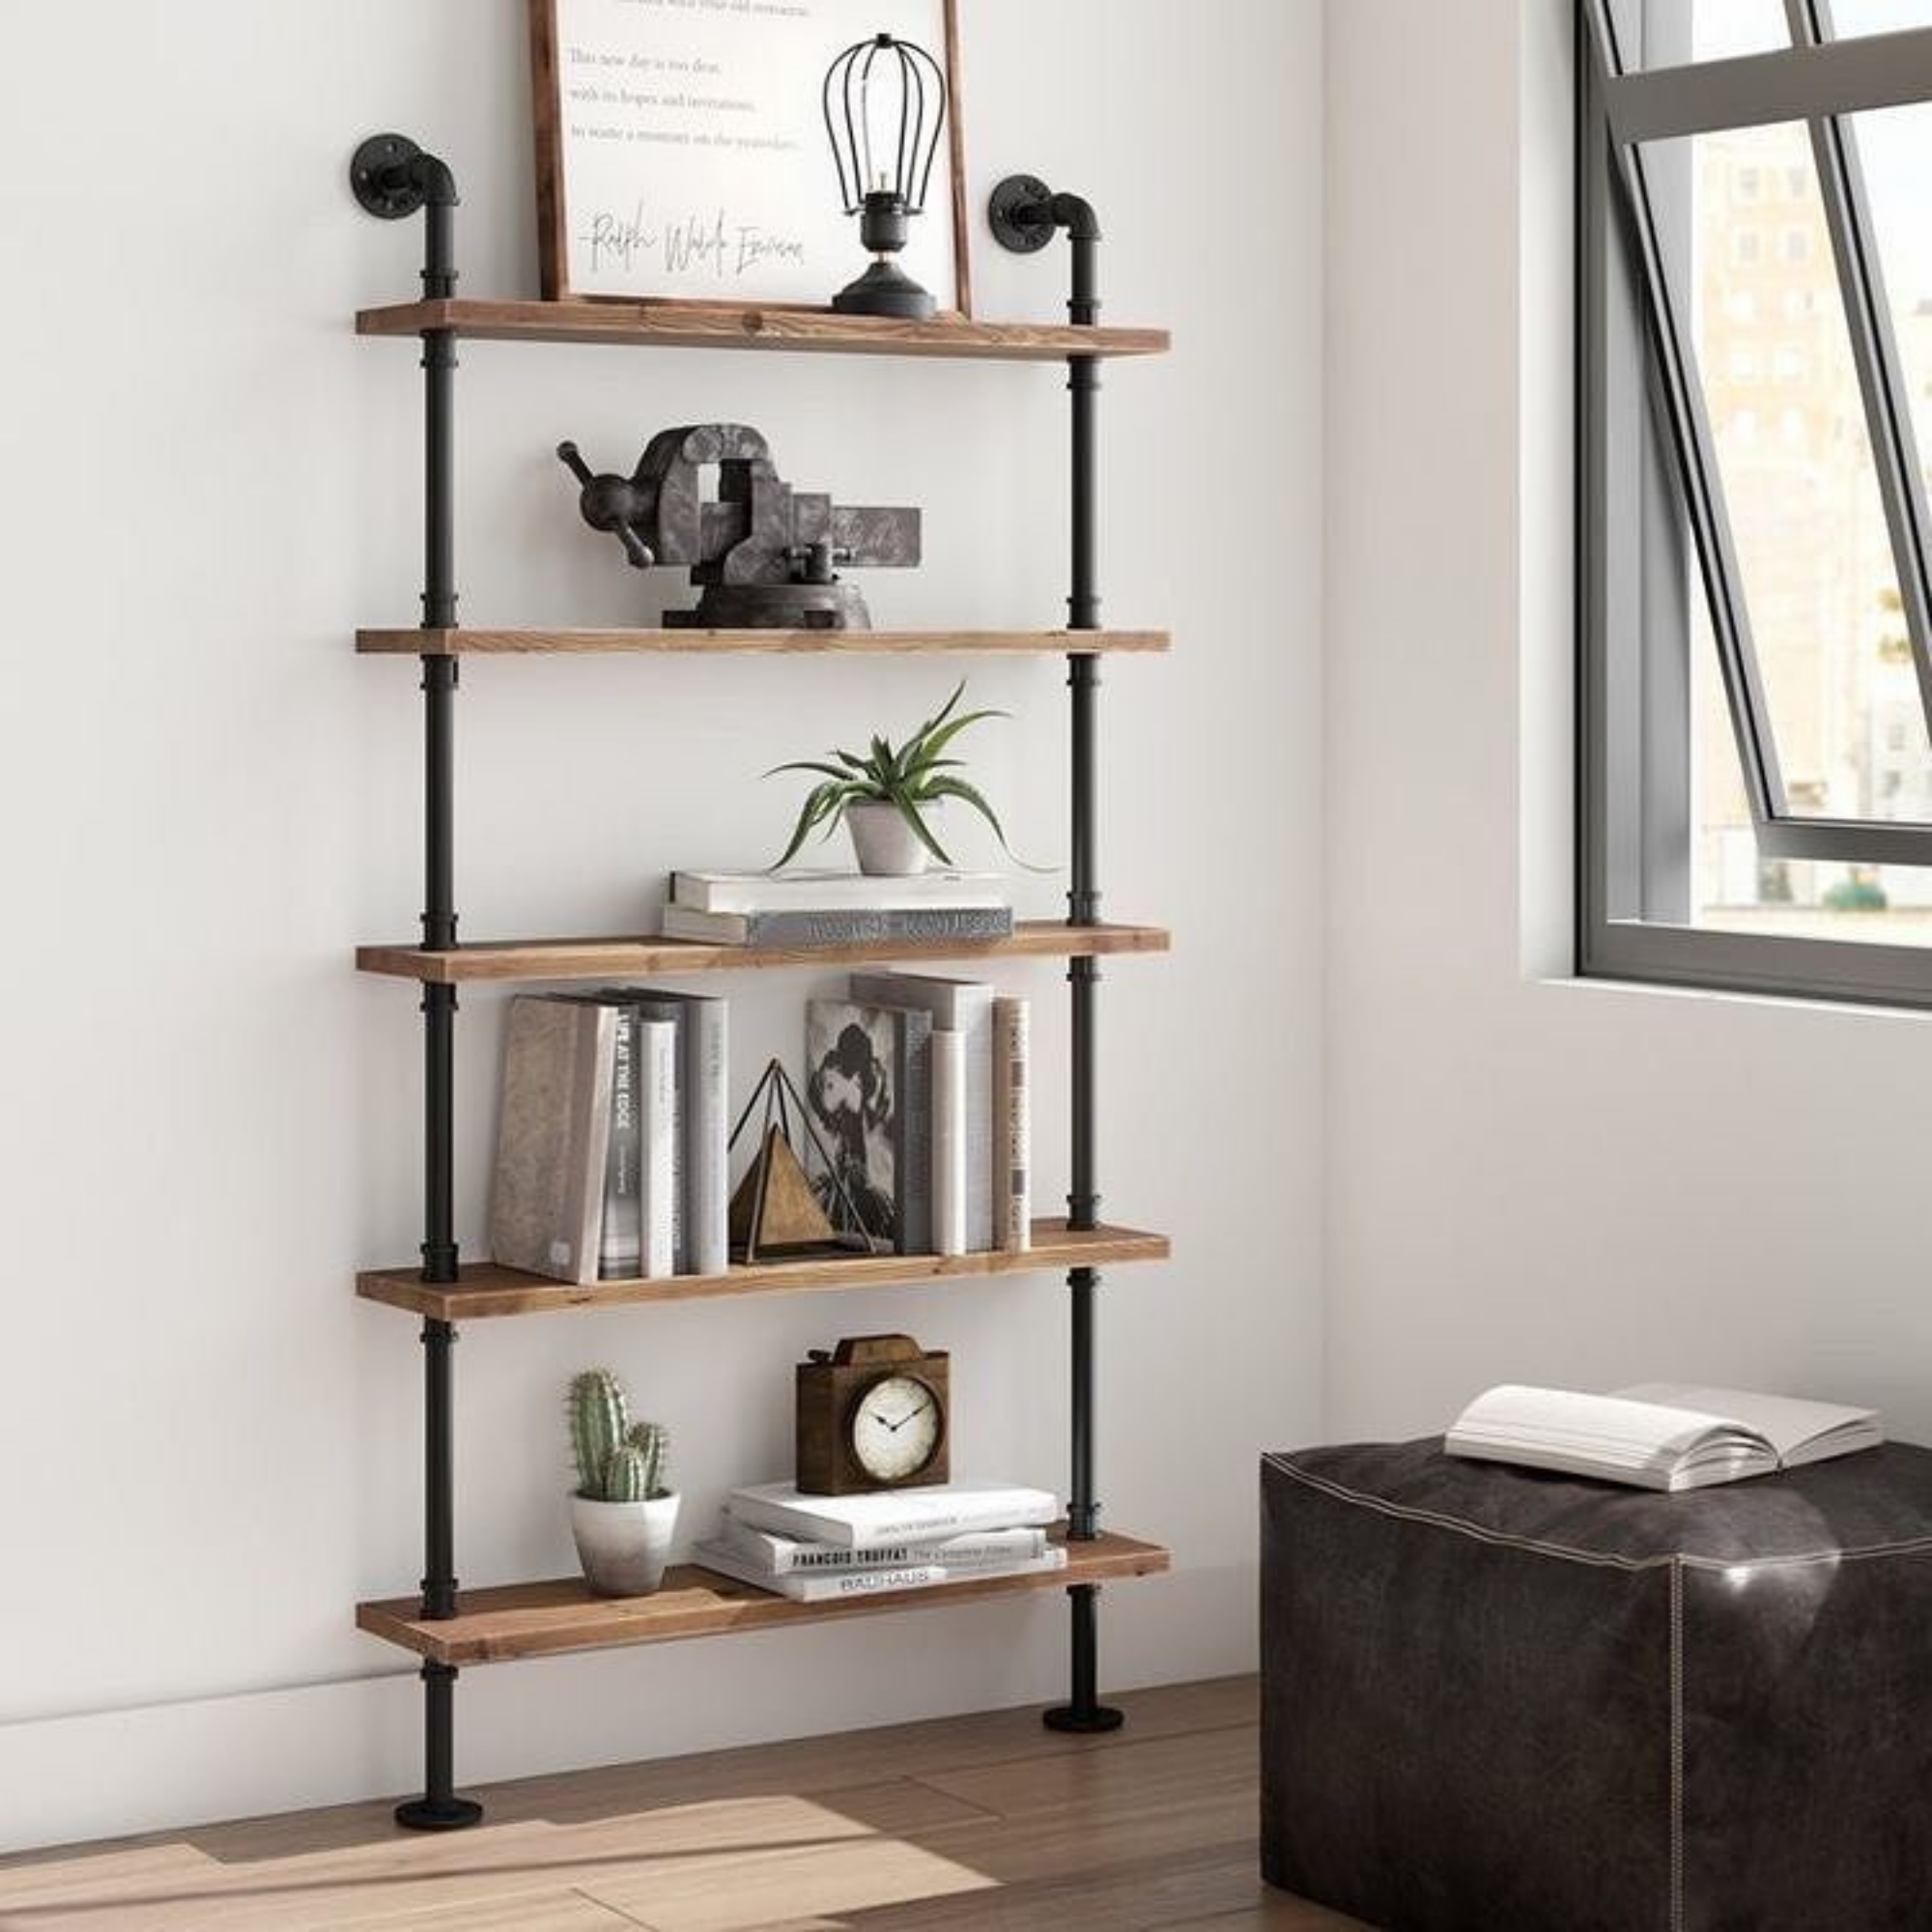 5 Shelf Industrial Pipe Shelving Unit, 60cm – Acumen Collection – Acumen Collection